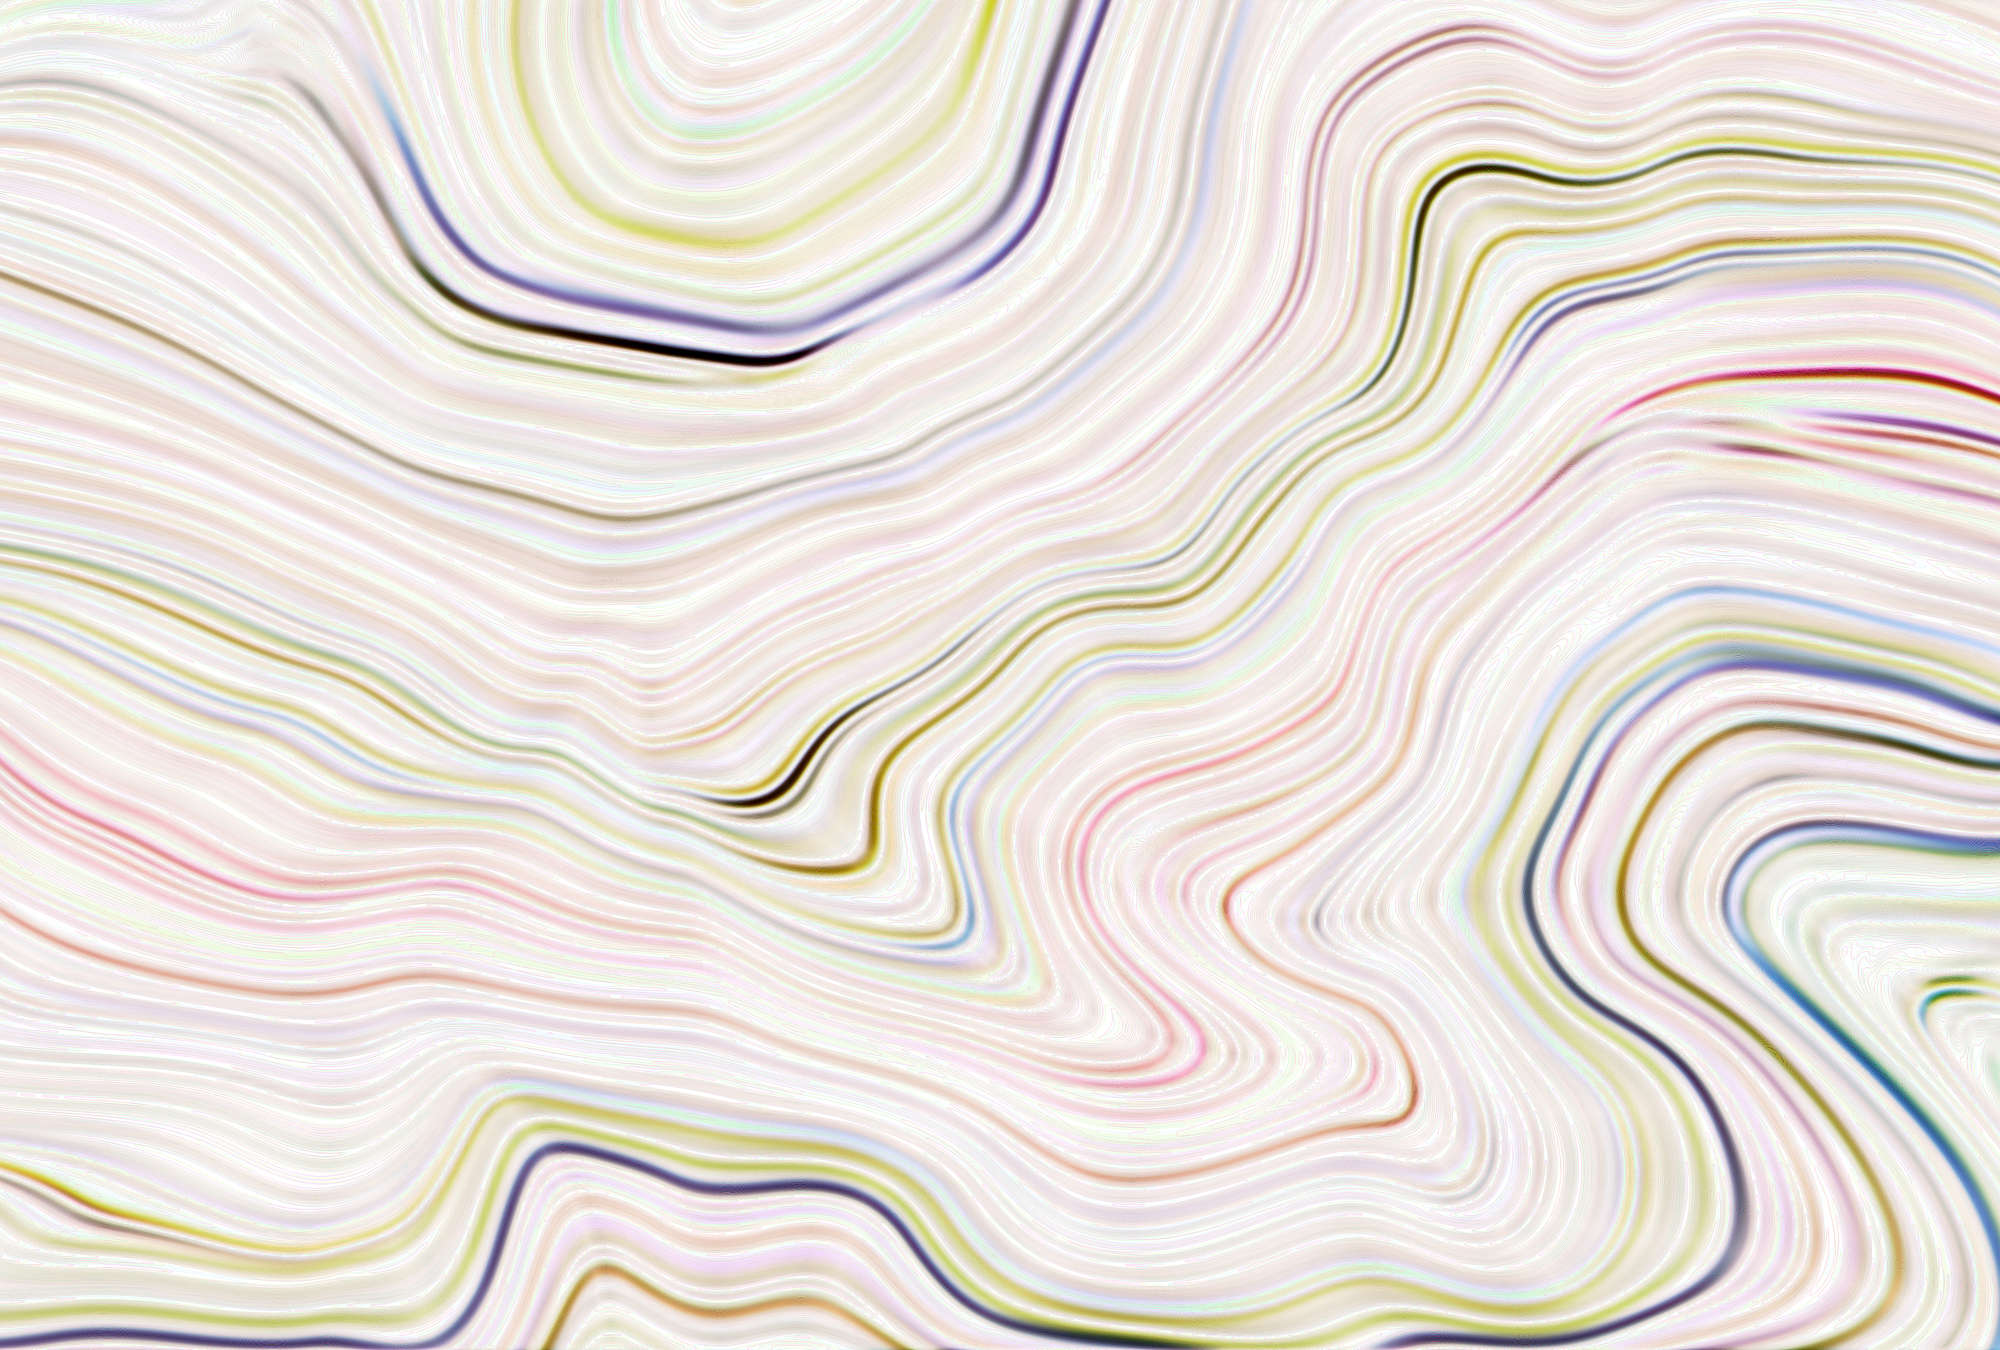             Photo wallpaper lines in batik look - colourful, white
        